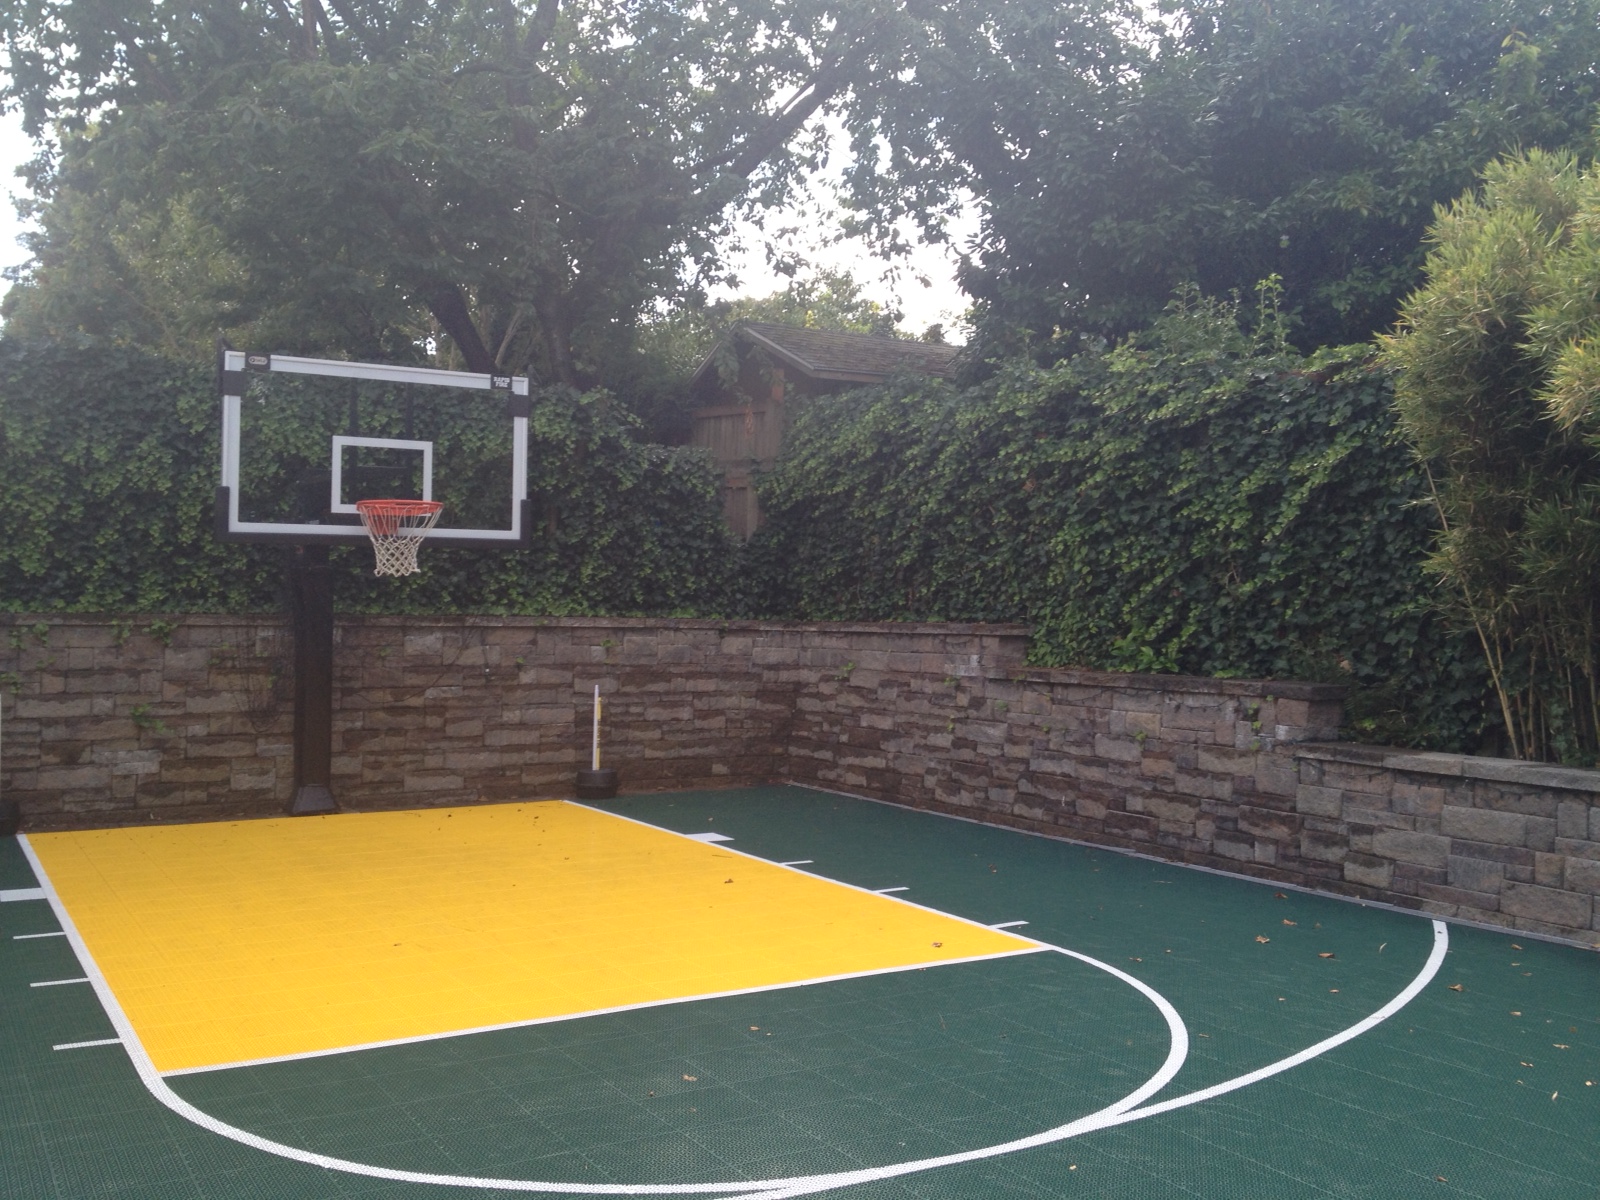 This Pro Dunk Platinum goal adds to this Oregon home.